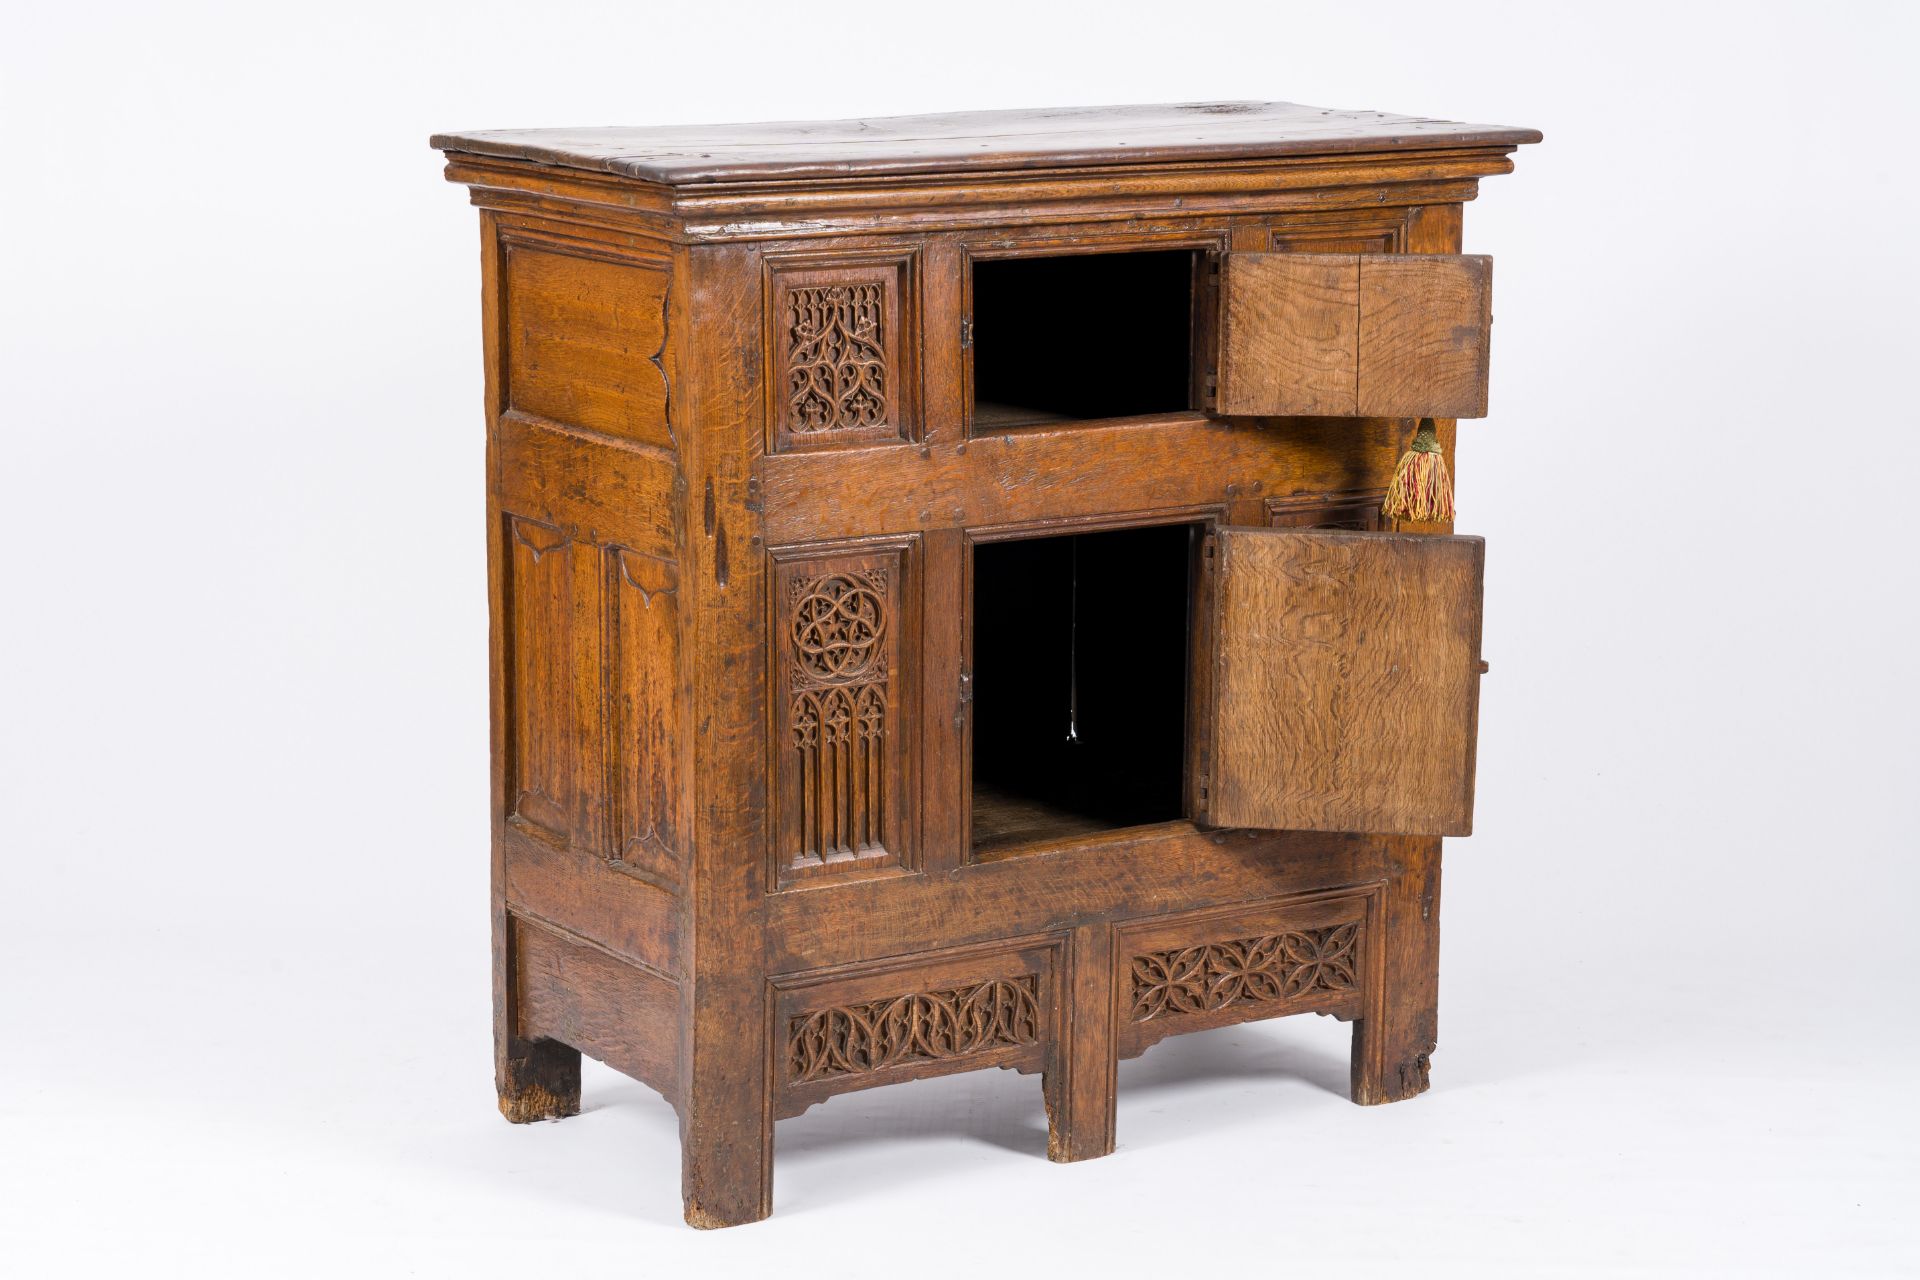 An exceptional Gothic wood two-door cupboard with linenfold and tracery panels, early 16th C. - Image 2 of 6